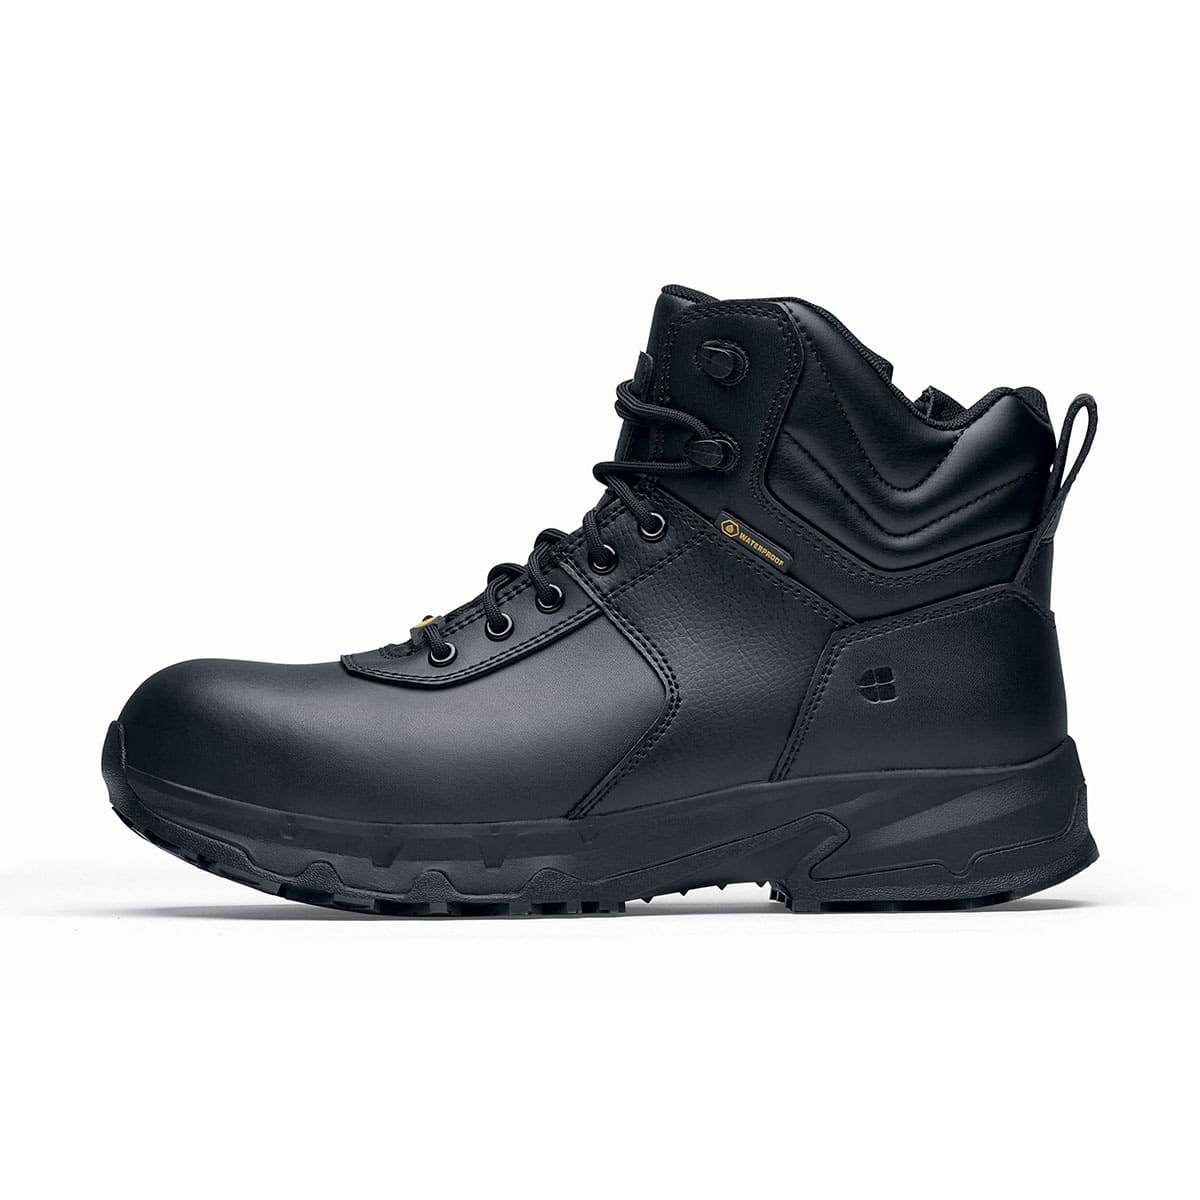 The Guard Mid from Shoes For Crews are waterproof slip-resistant safety boots with a safety toe cap, seen from the left.